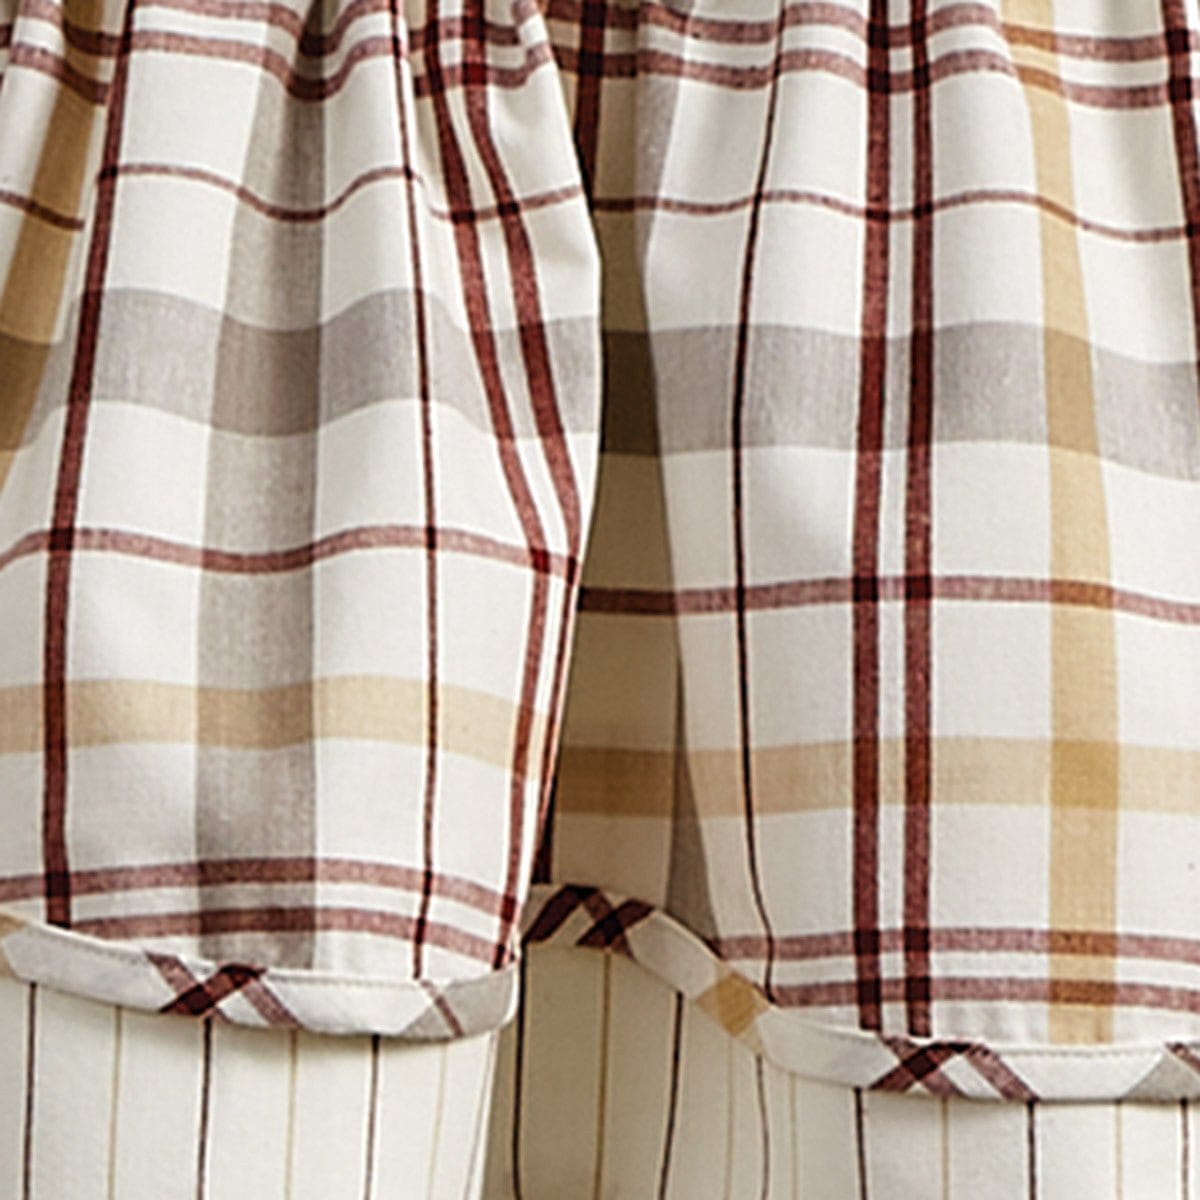 Kingswood Layered Valance Lined-Park Designs-The Village Merchant